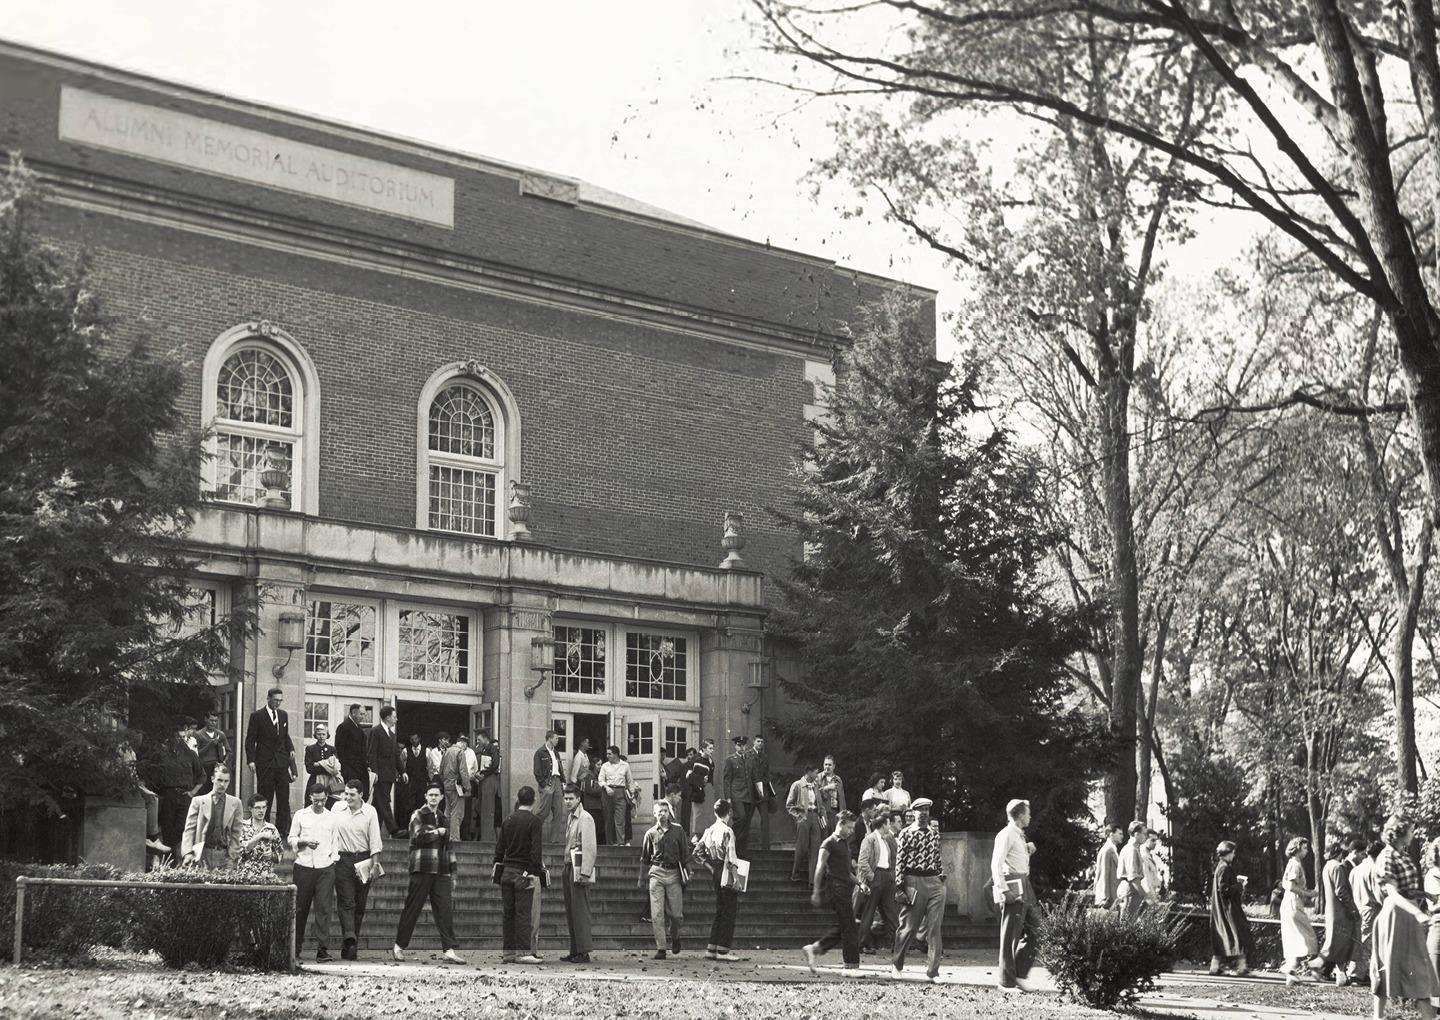 Known then as Alumni Memorial Auditorium, the building was a flurry of student activity in the late 1940s. Photo courtesy of the Mahn Center for Archives and Special Collections